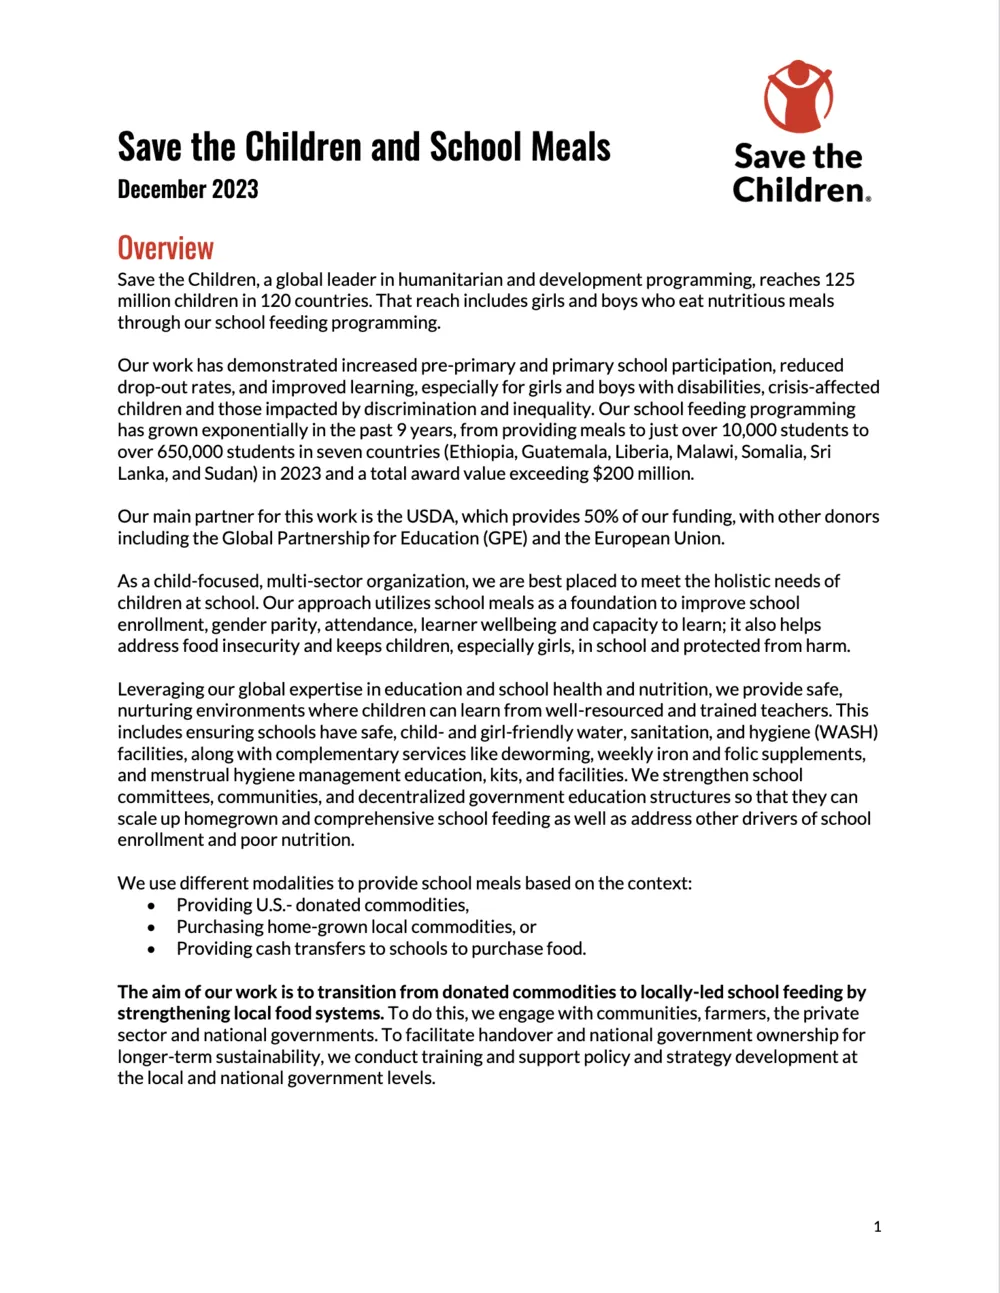 Save the Children and School Meals: Overview